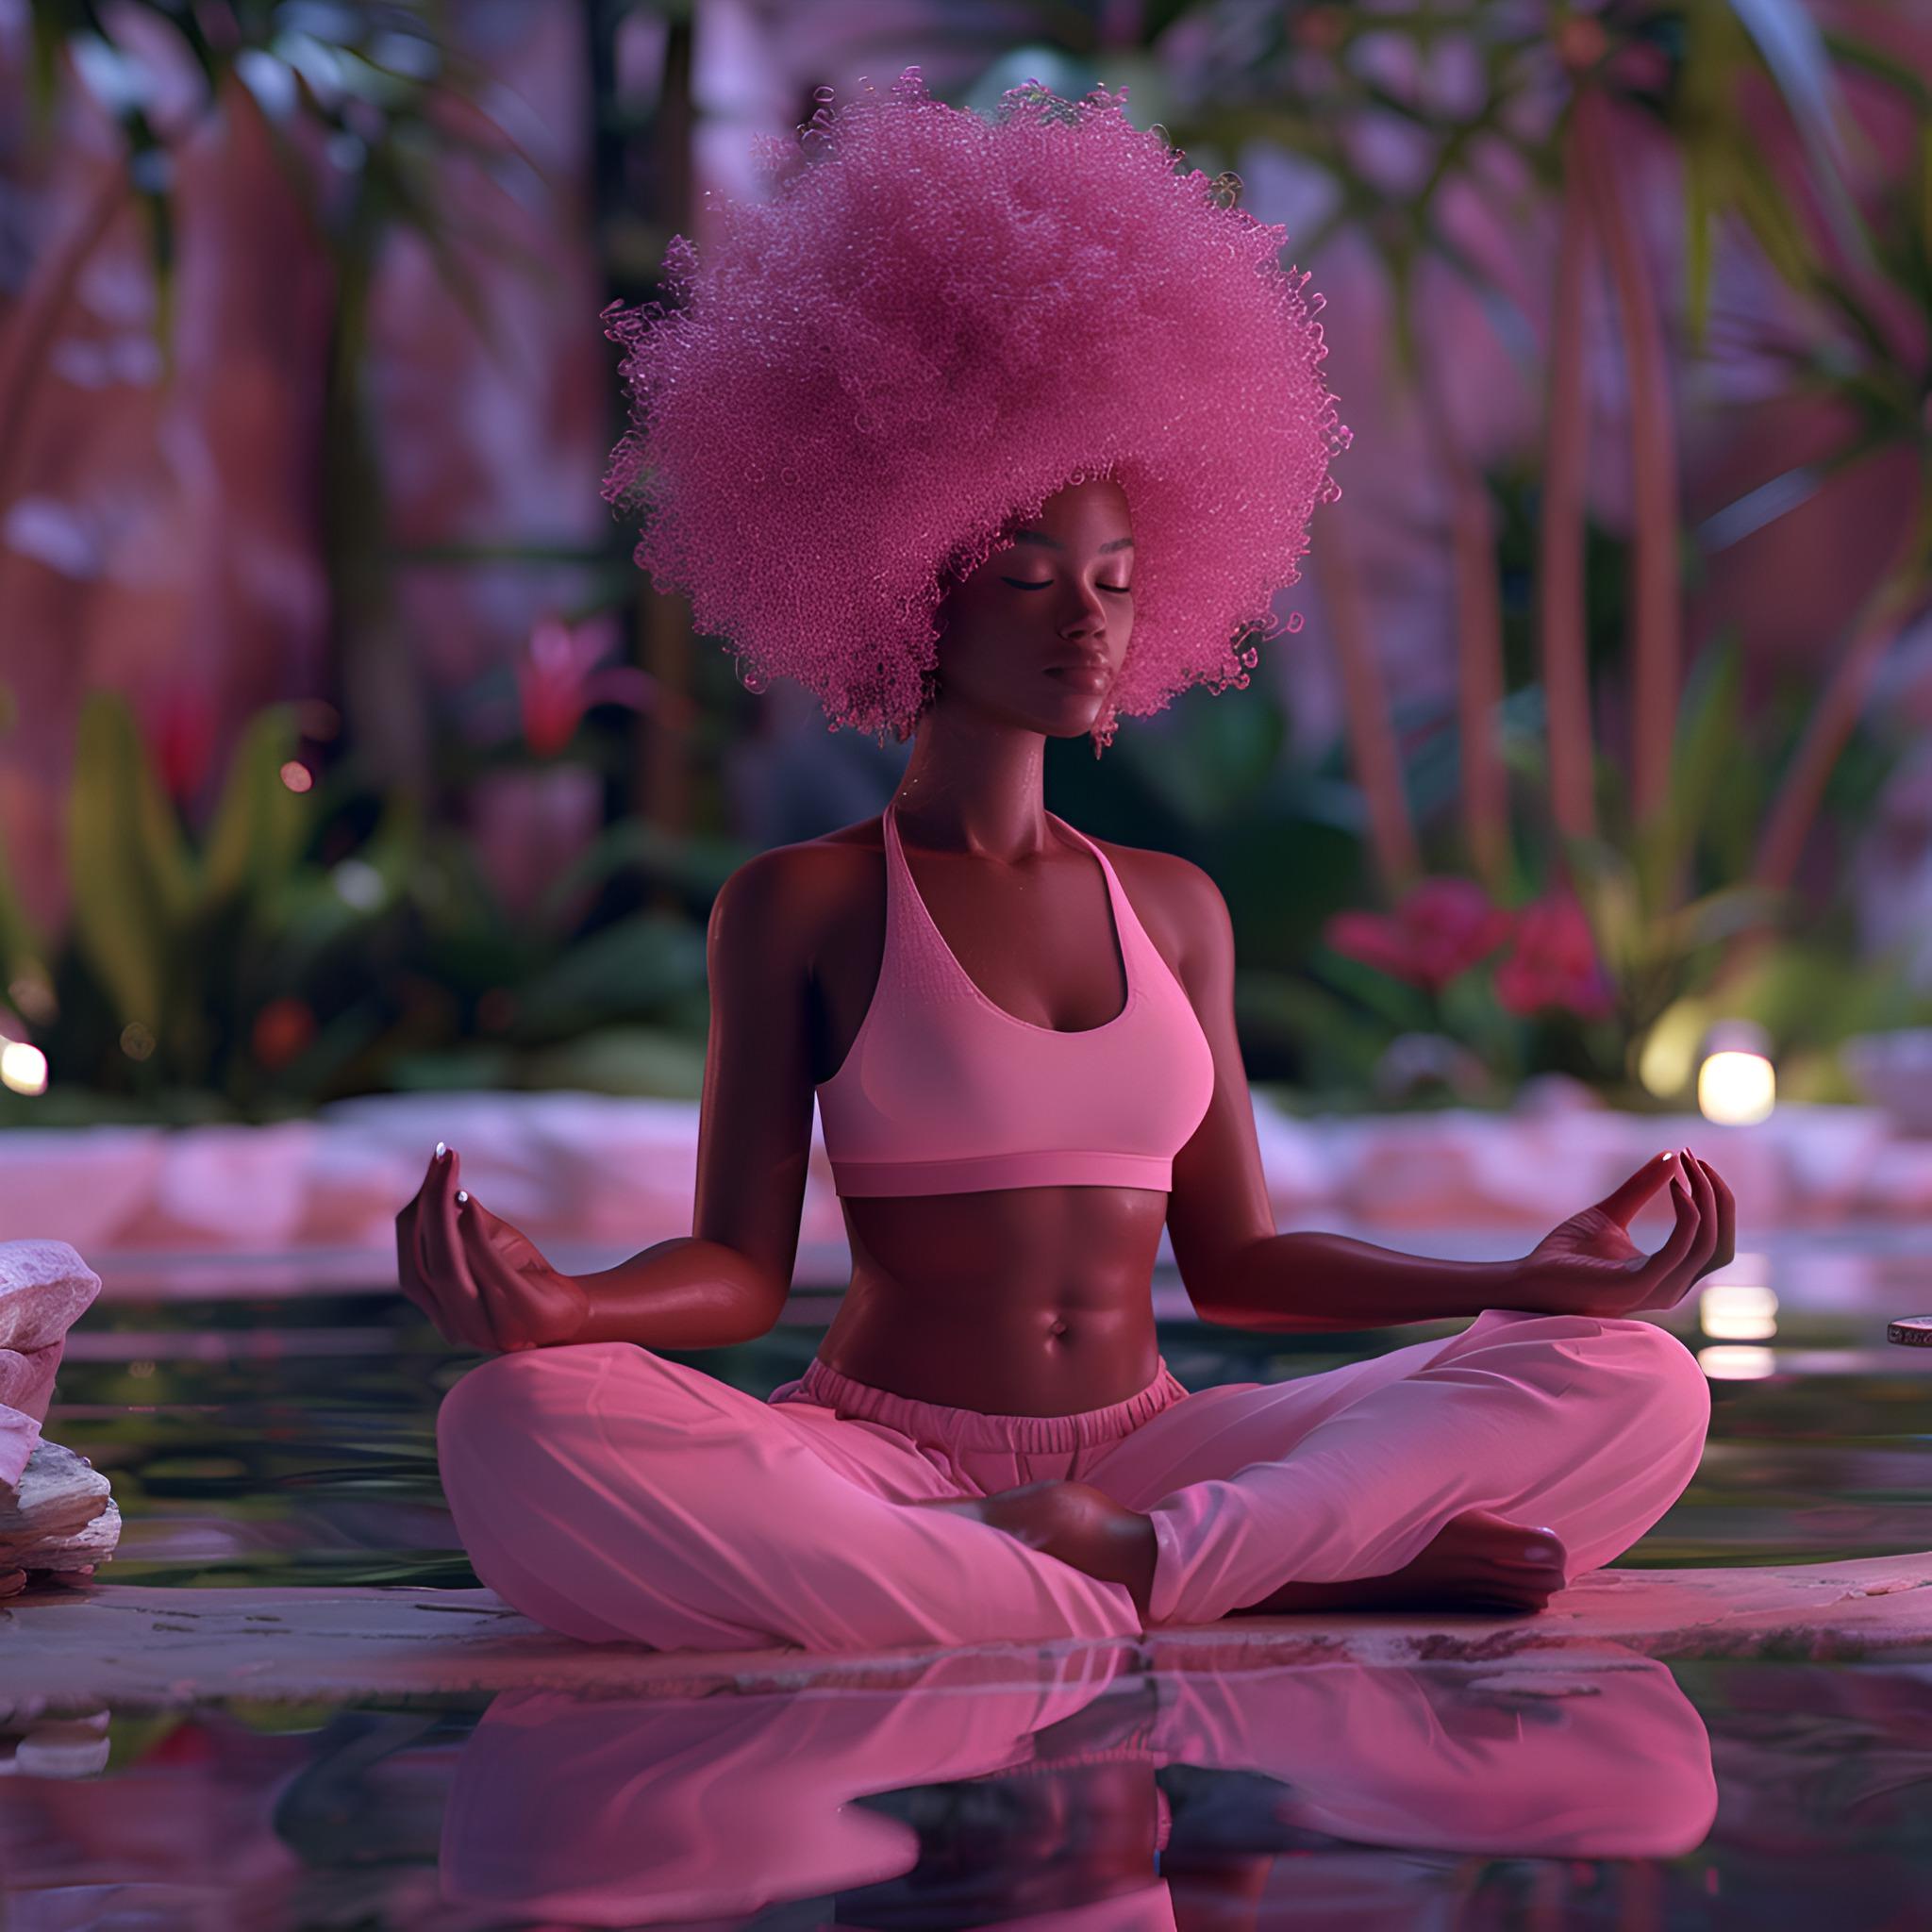 Guided Meditation For Black Women - Guided Meditation For Black Women: Inhaling Peace